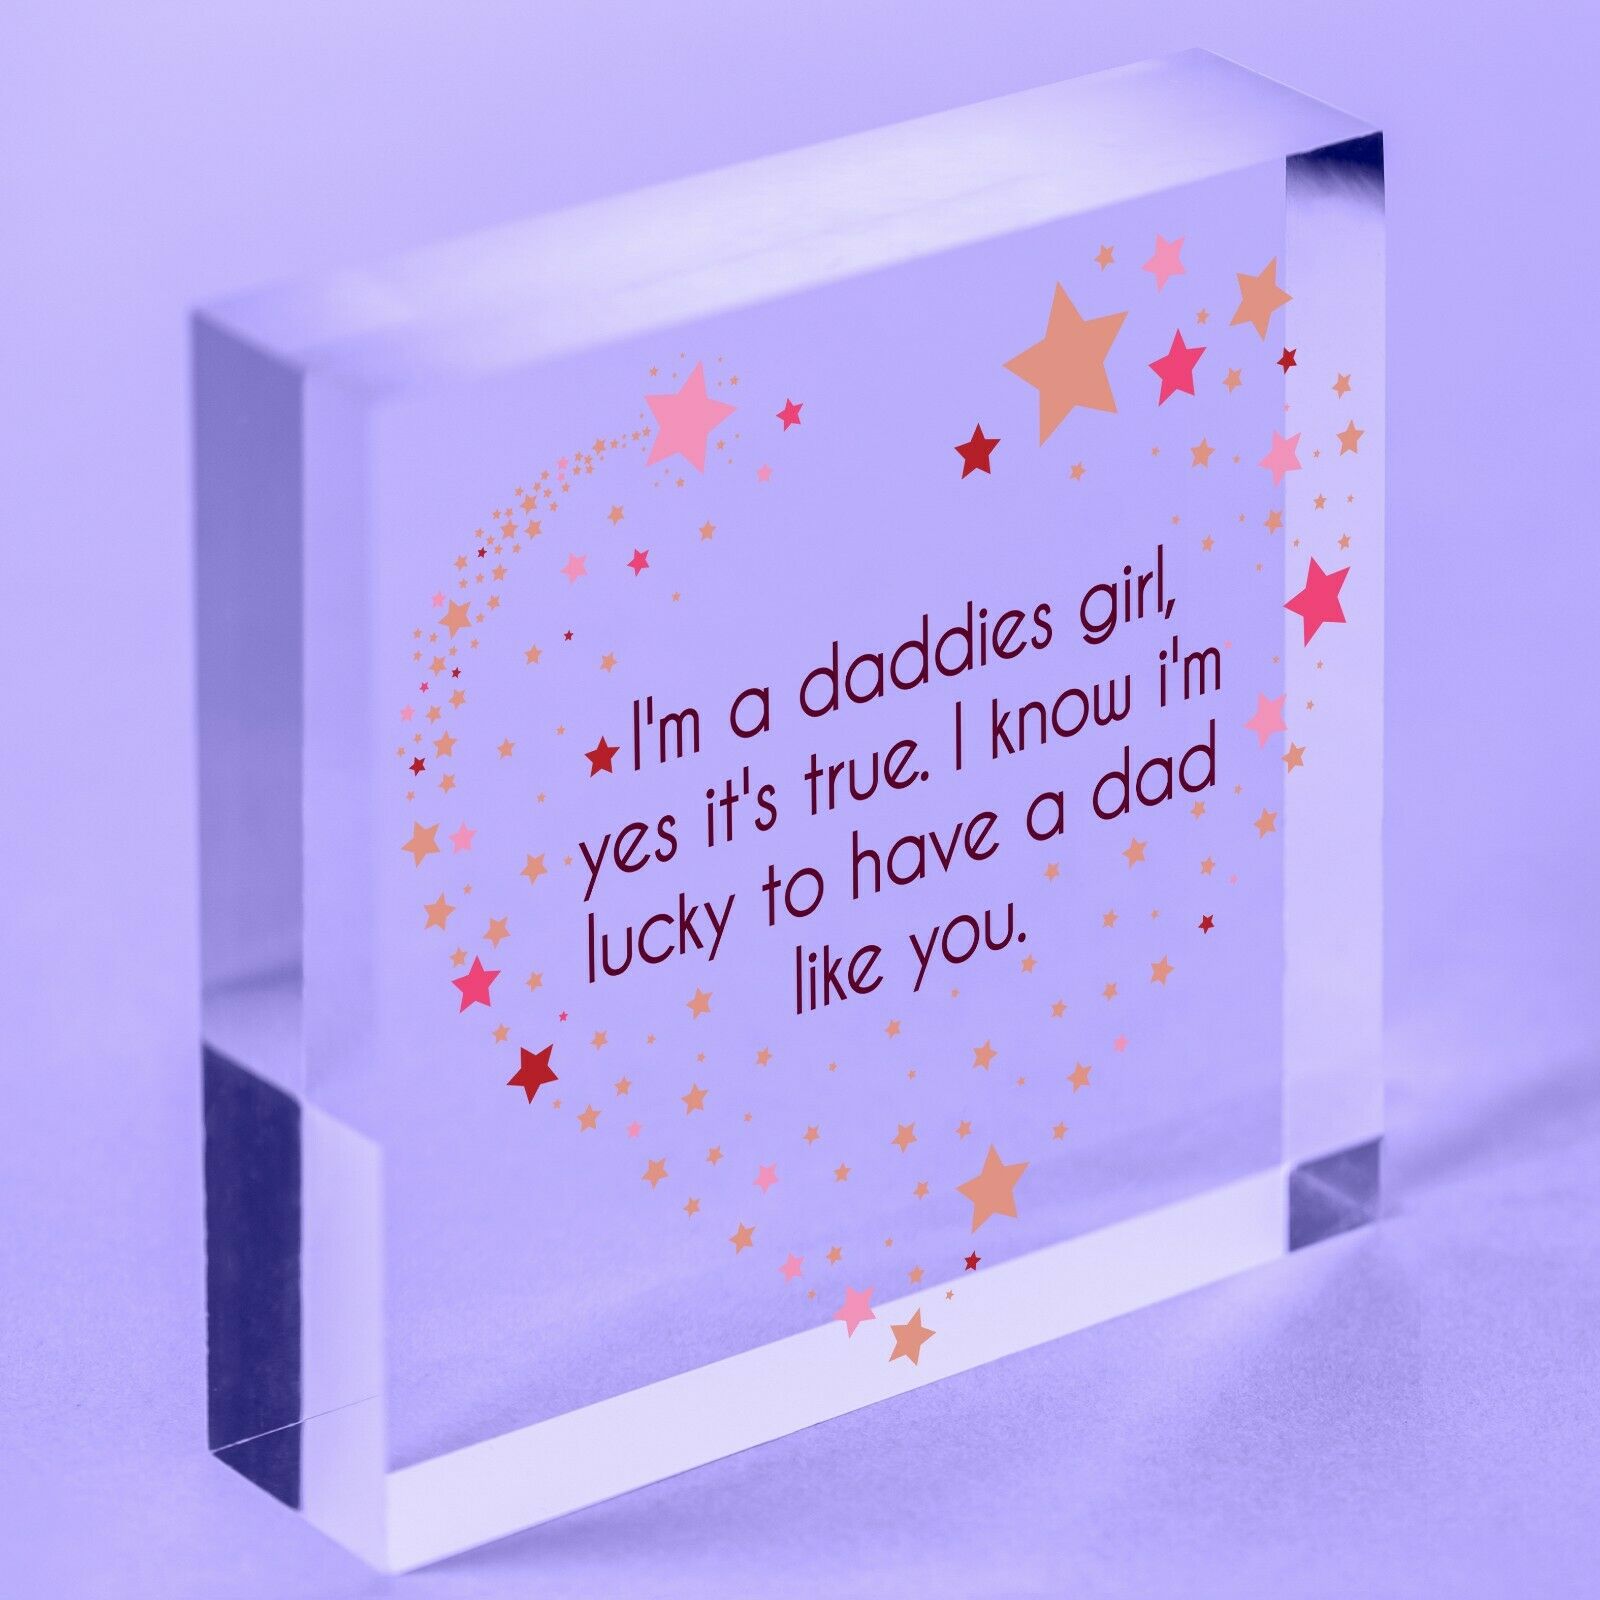 Daddies Girl Fathers Day Dad Acrylic Block Thank You Birthday Miss You Gift